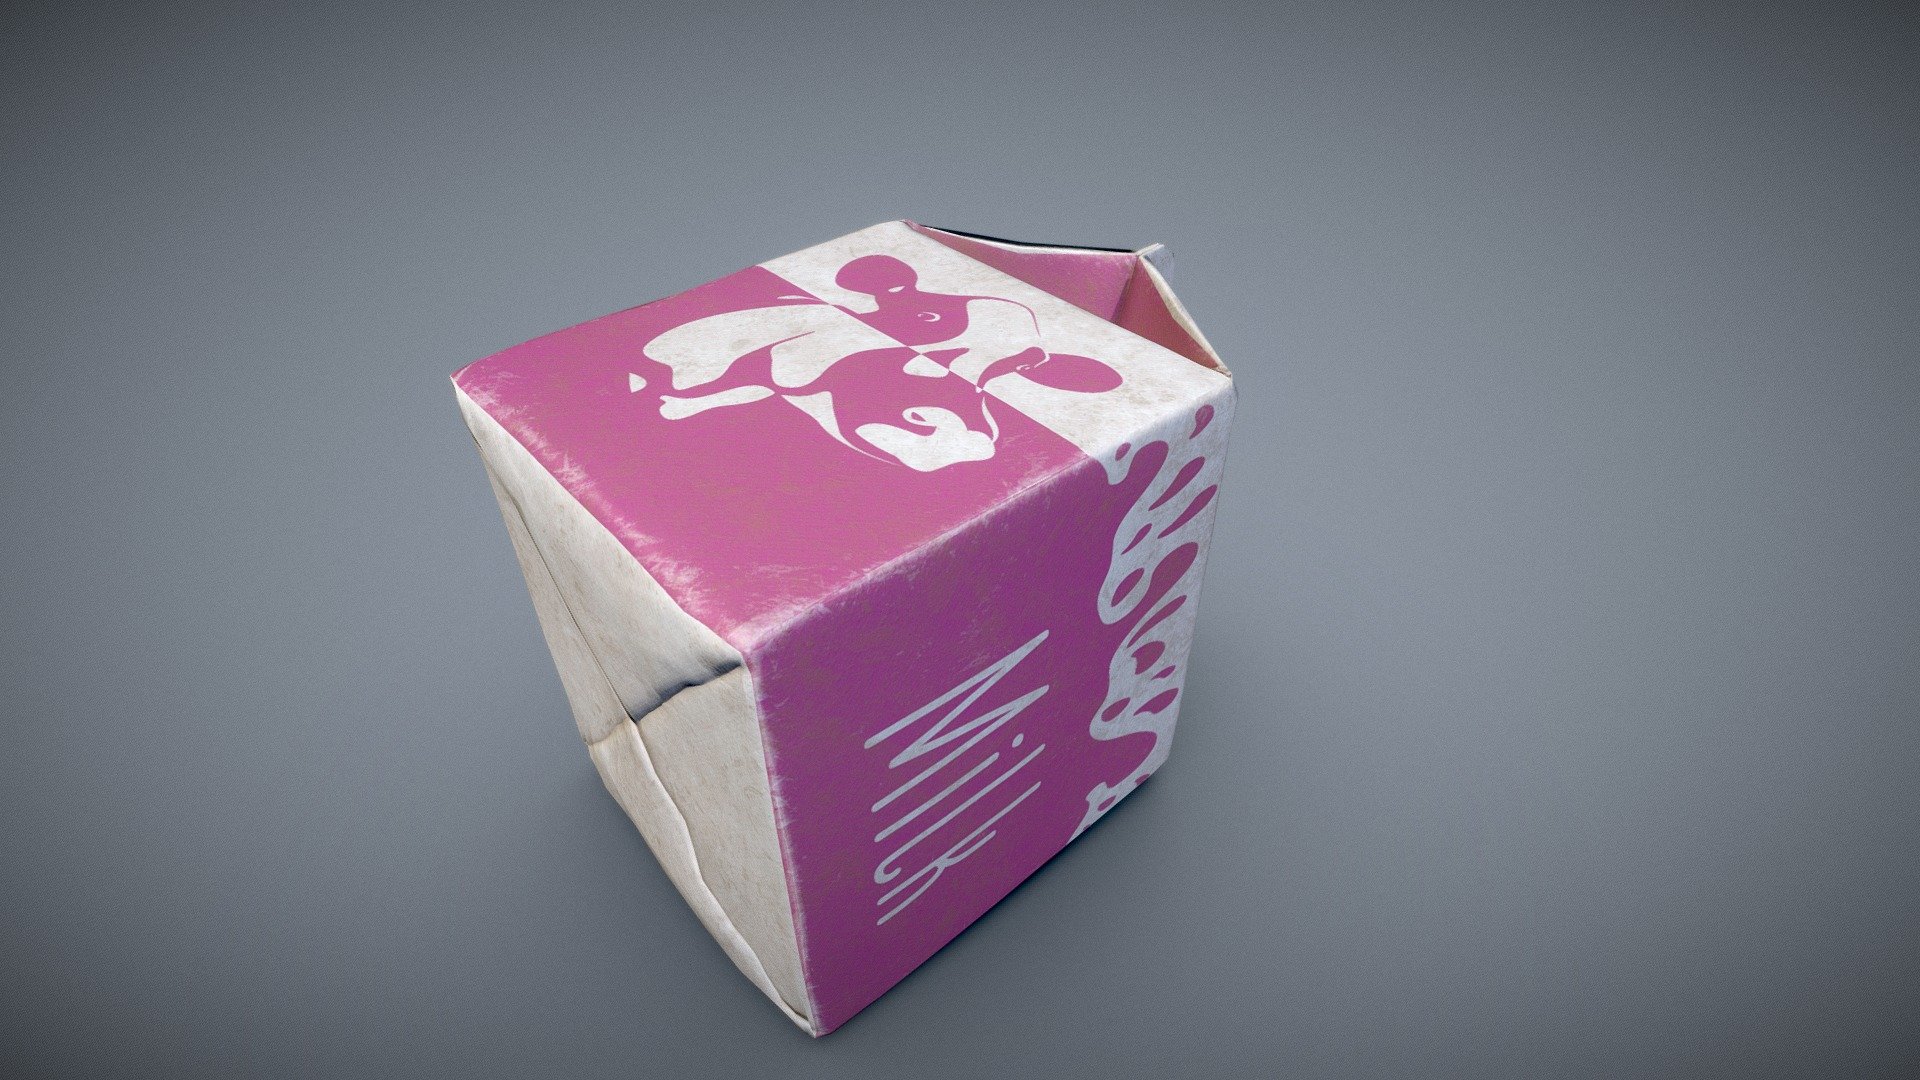 milk carton game-ready prop made using zbrush, maya, photoshop and substance painter. The milk carton was sculpted in zbrush and retopologized in maya. I used photoshop and painter to create the textures 3d model